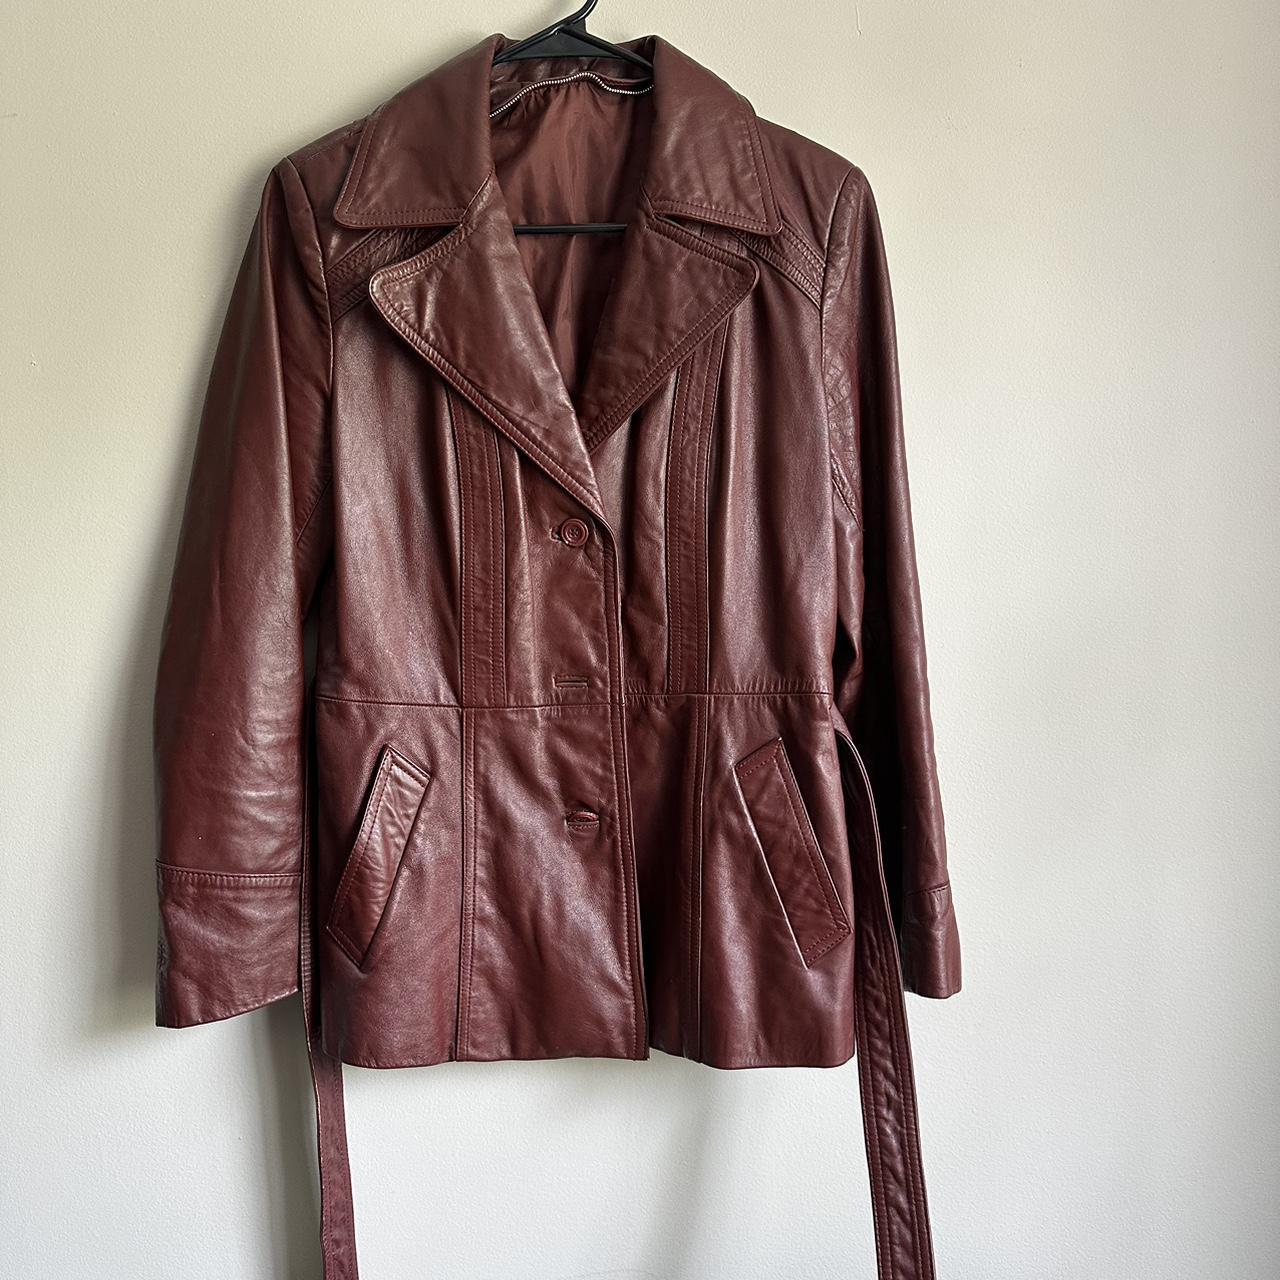 Wilson’s Leather Women's Burgundy and Red Jacket | Depop